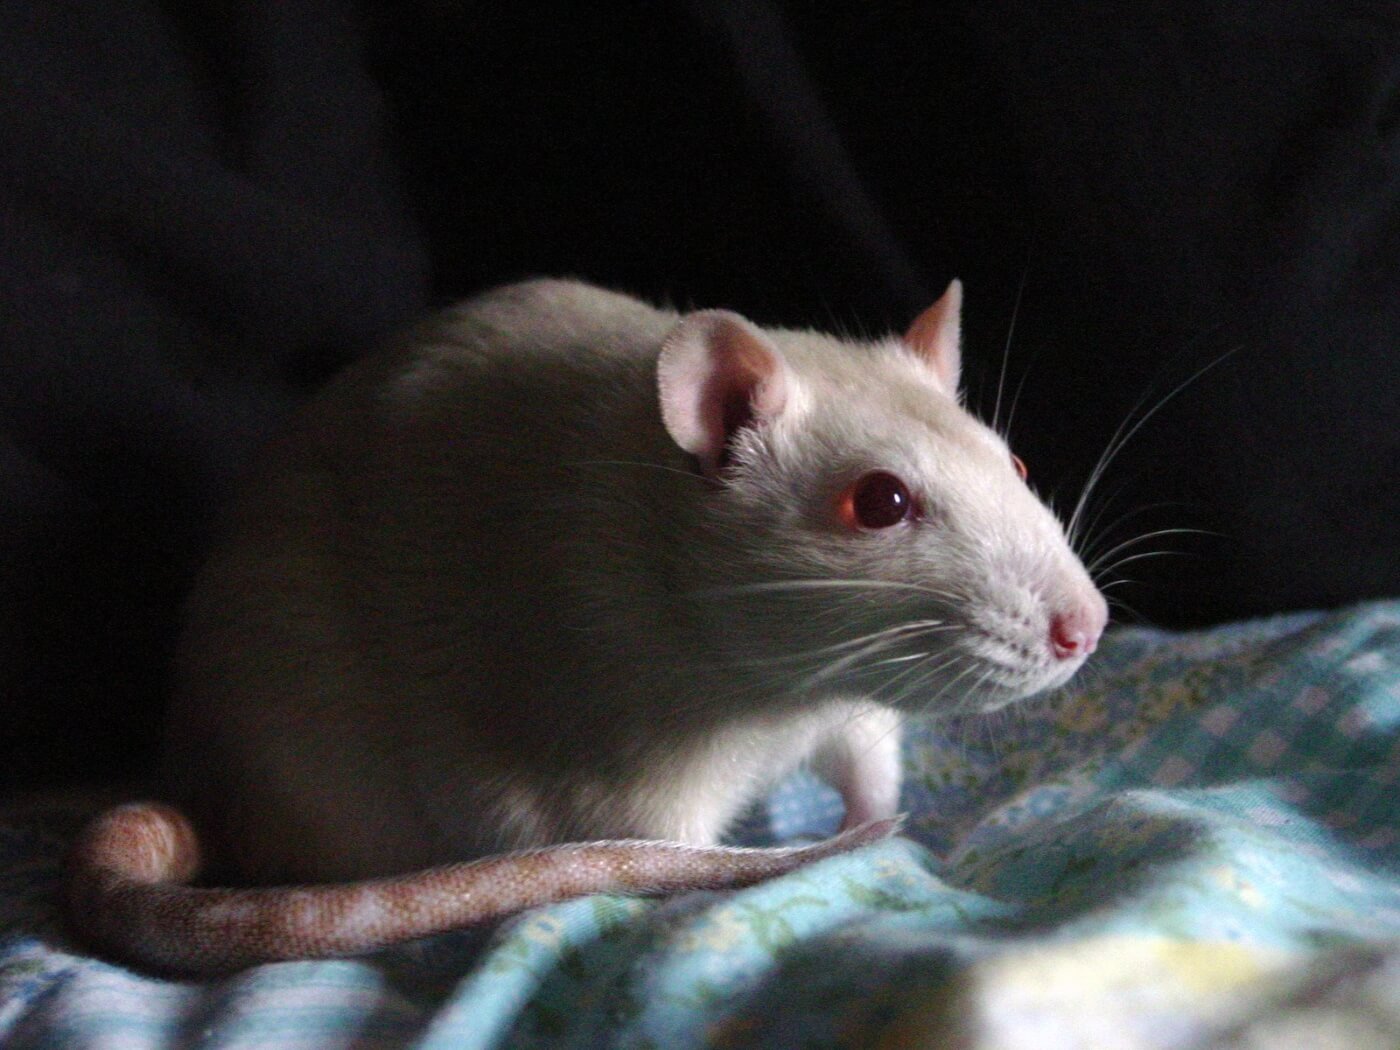 A white rat sits on a blue blanket